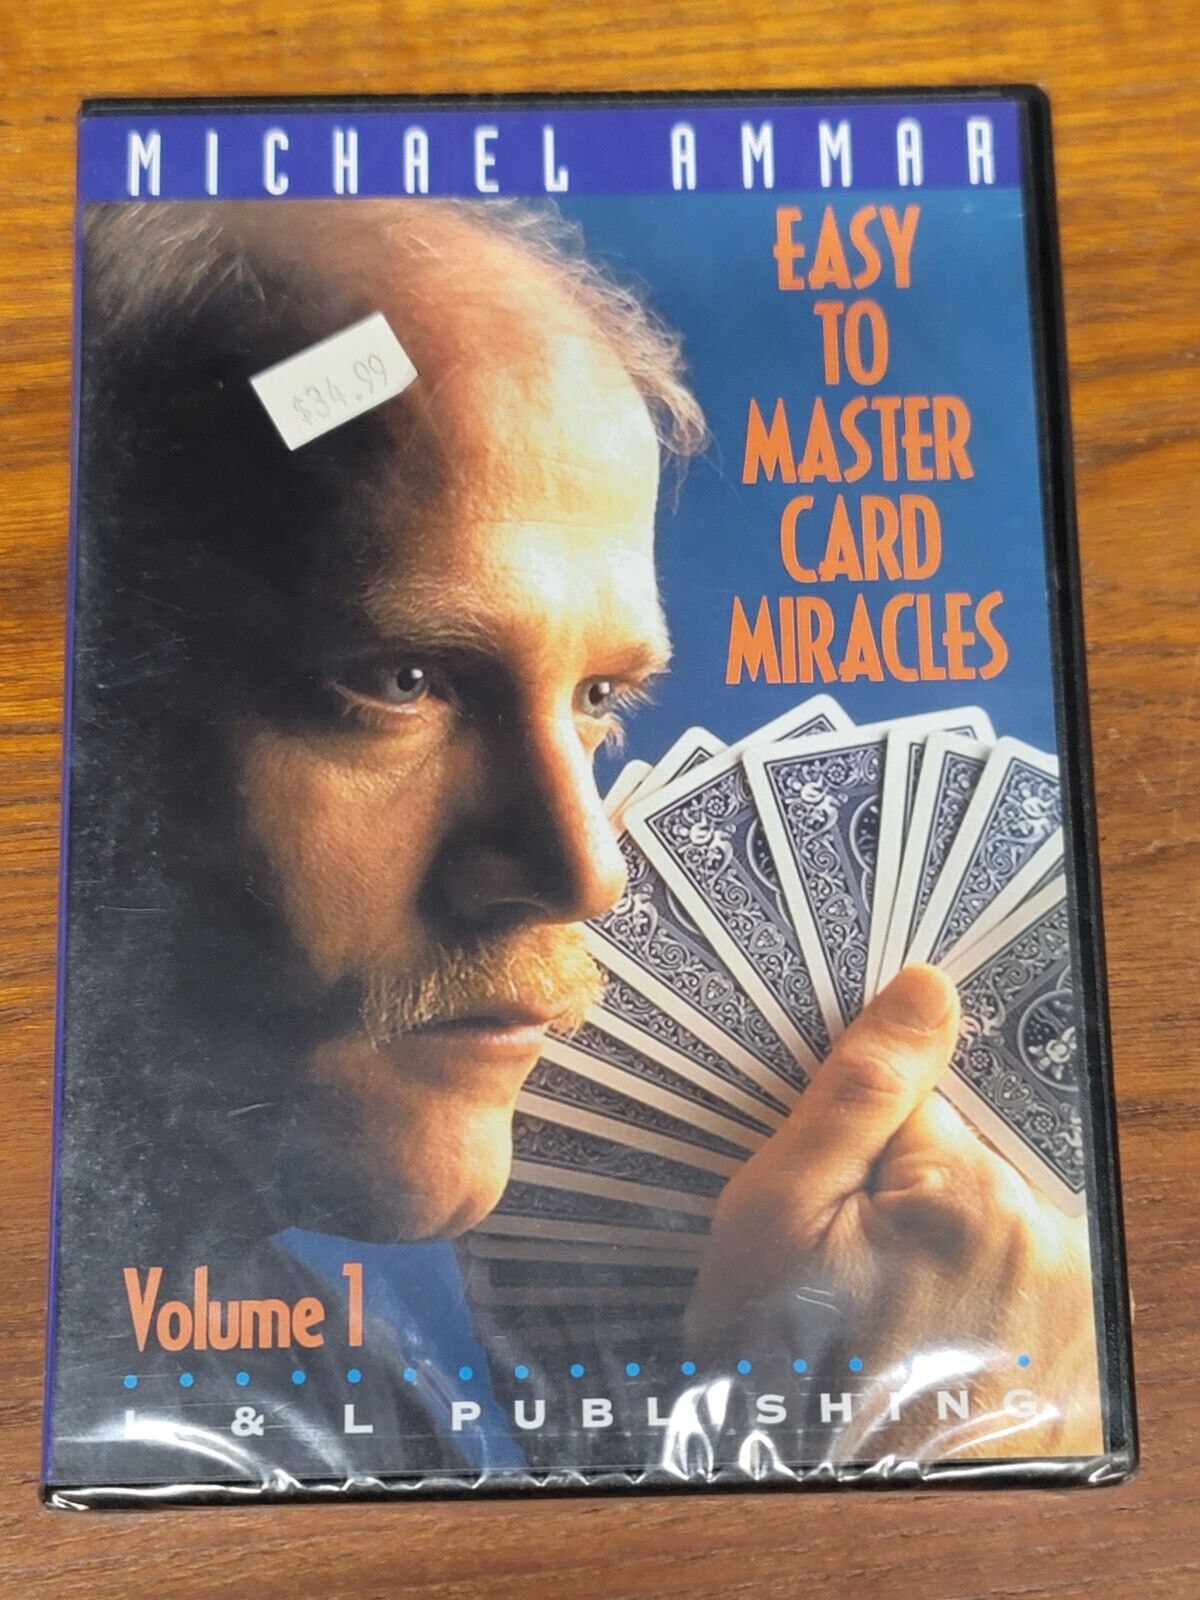 Easy to Master Card Miracles Volume 1 by Michael Ammar - DVD - NEW / SEALED